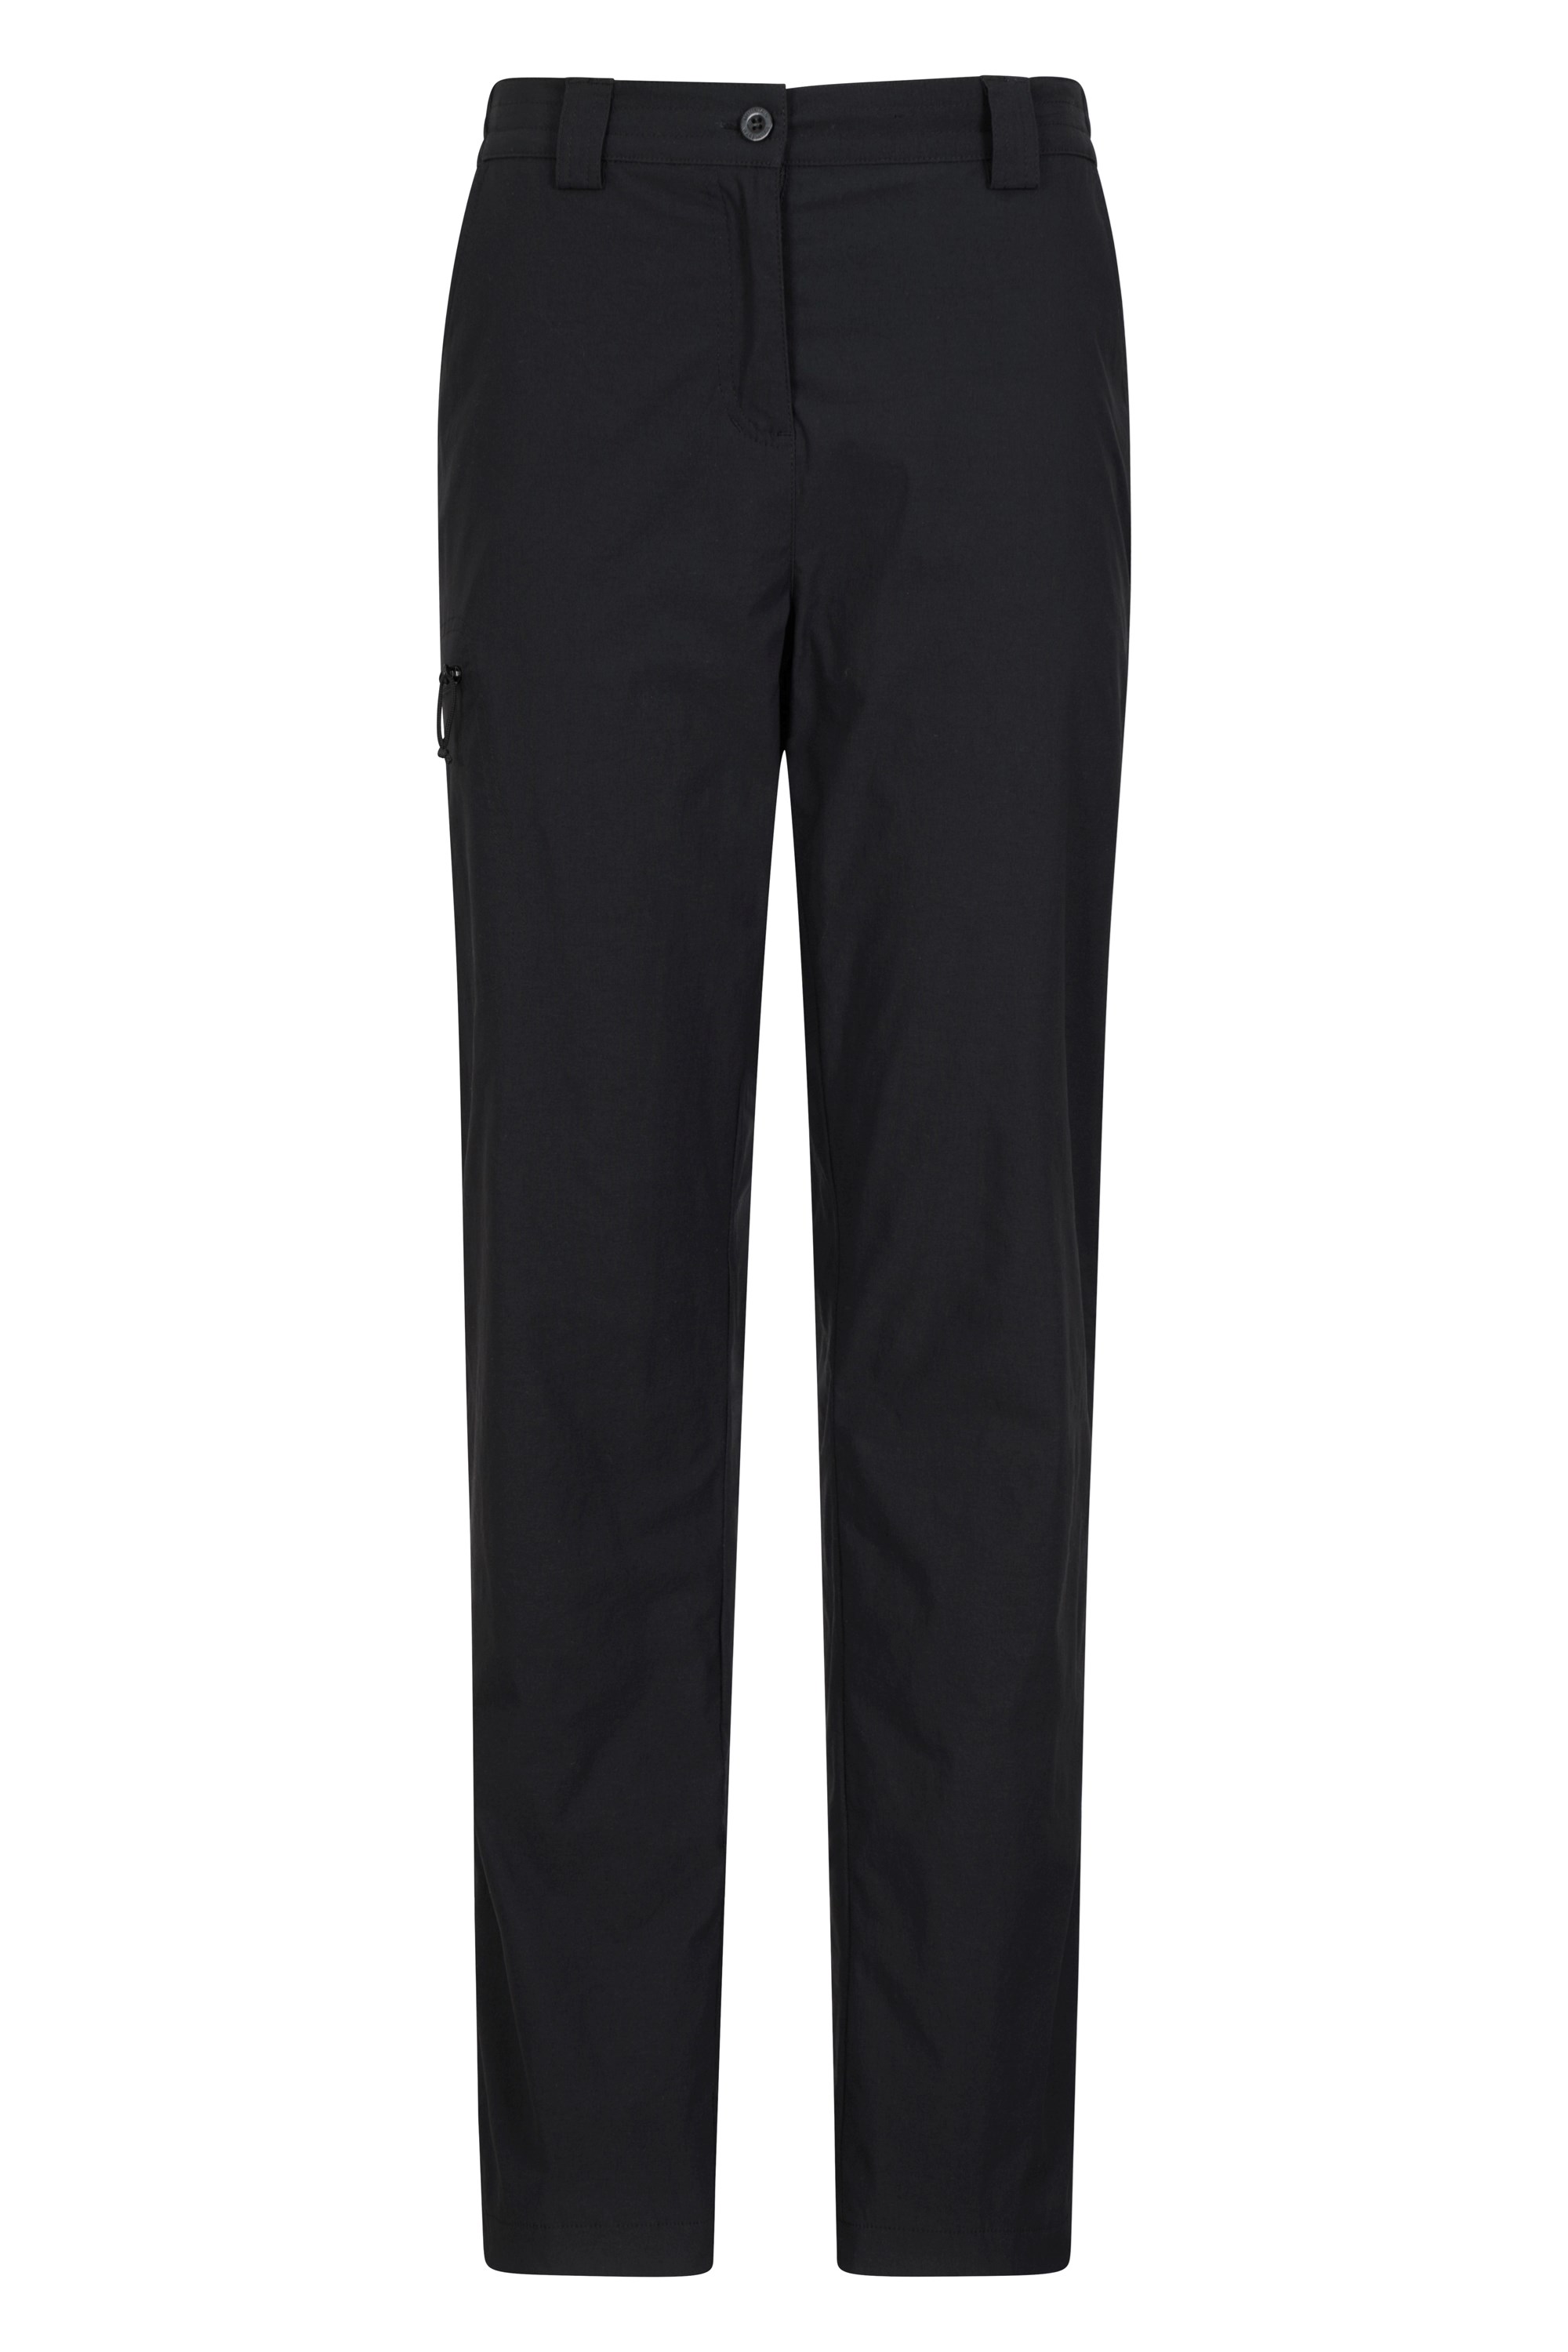 Joules Ladies Hepworth Stretch Trousers  Millbry Hill